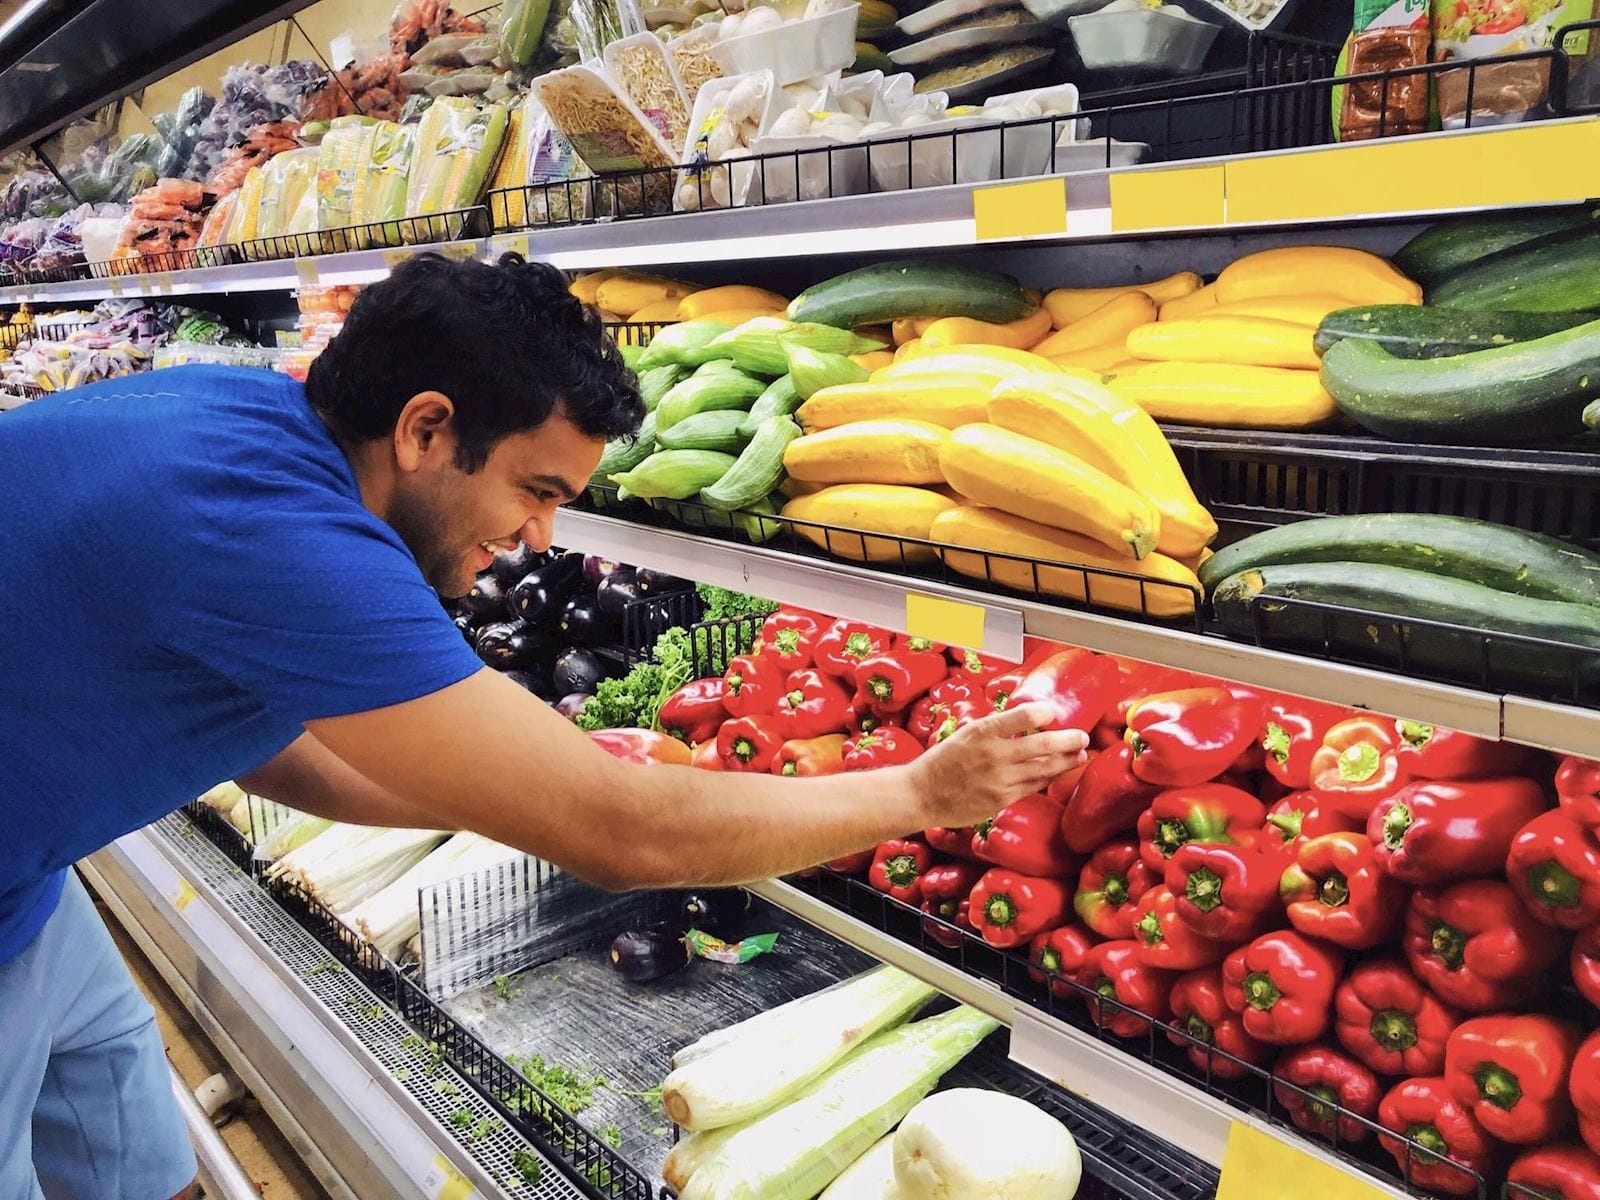 man selects red pepper from produce section at grocery store